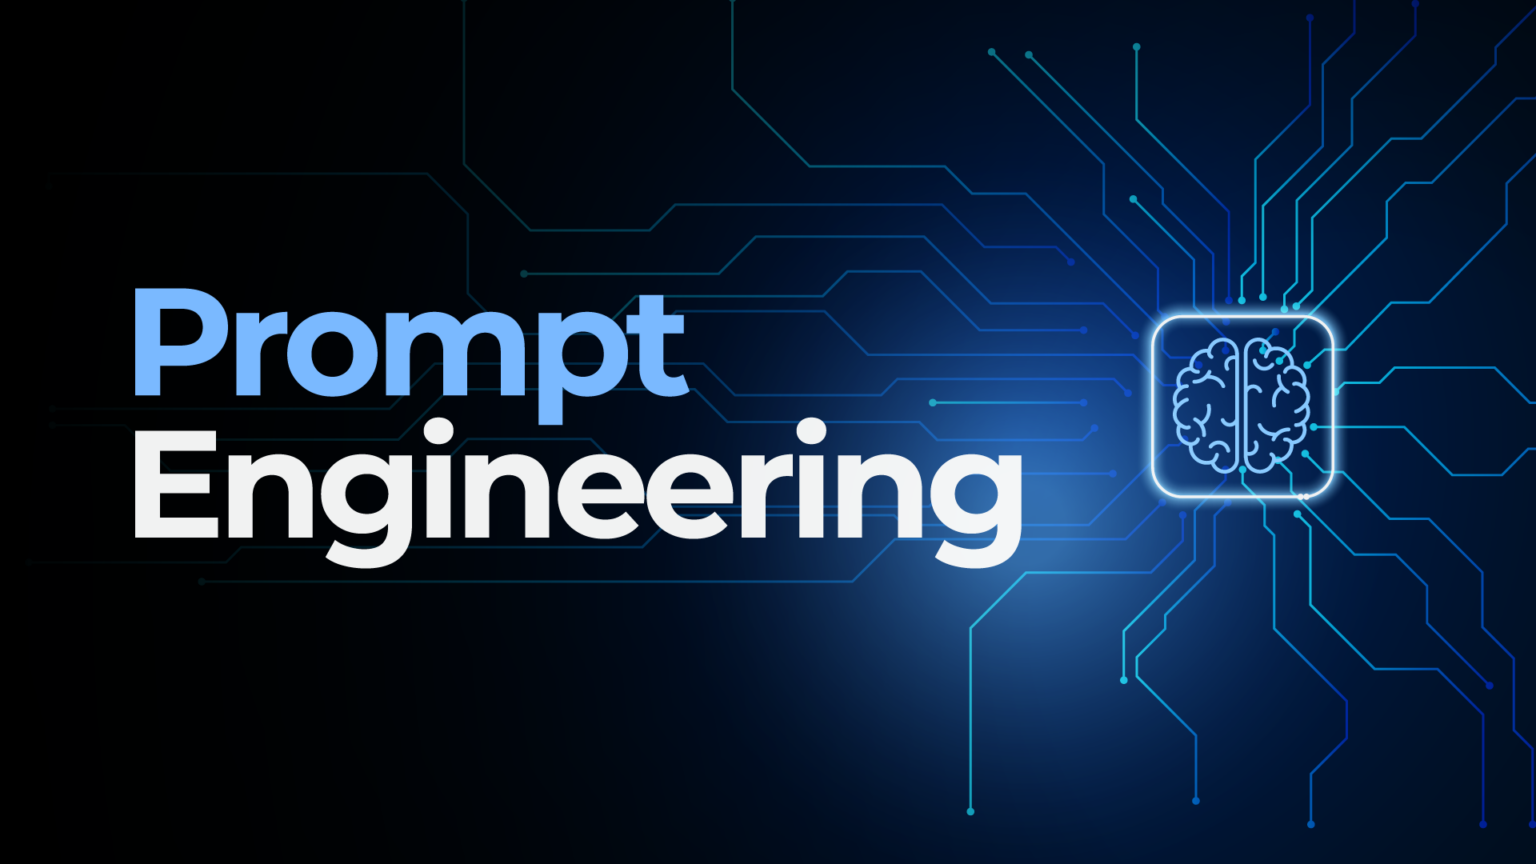 Blue background with the words "Prompt Engineering" in white letters.